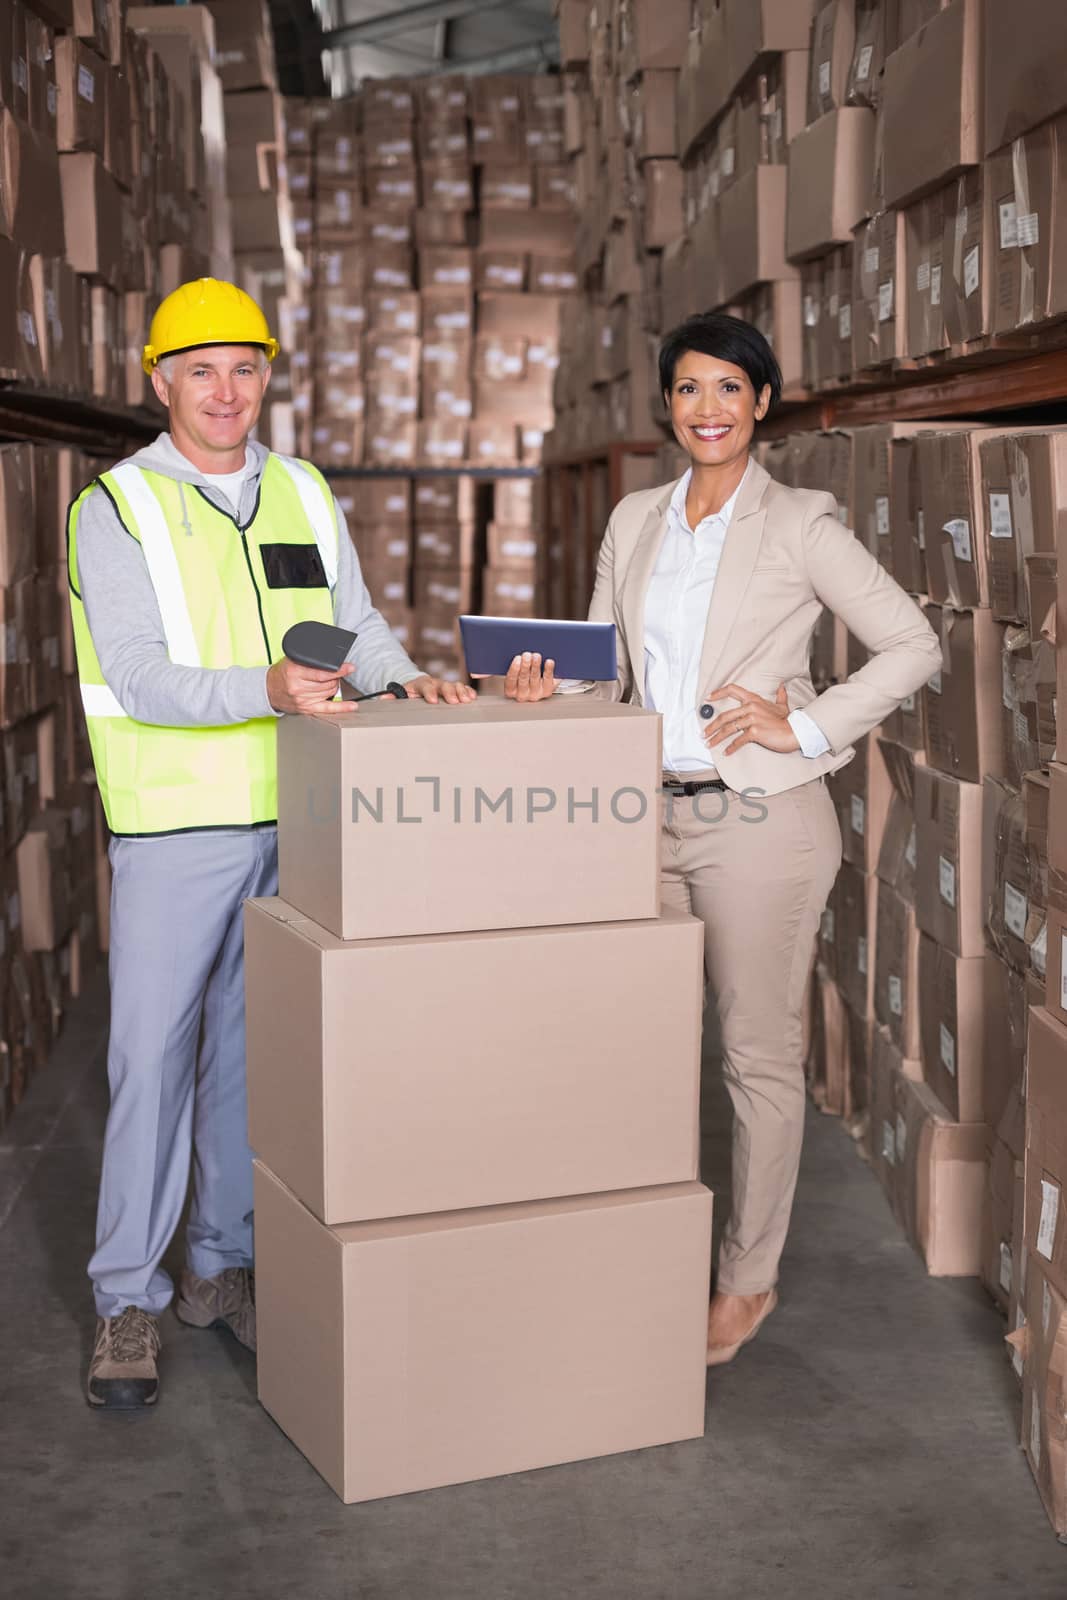 Warehouse worker scanning box with manager holding tablet pc by Wavebreakmedia